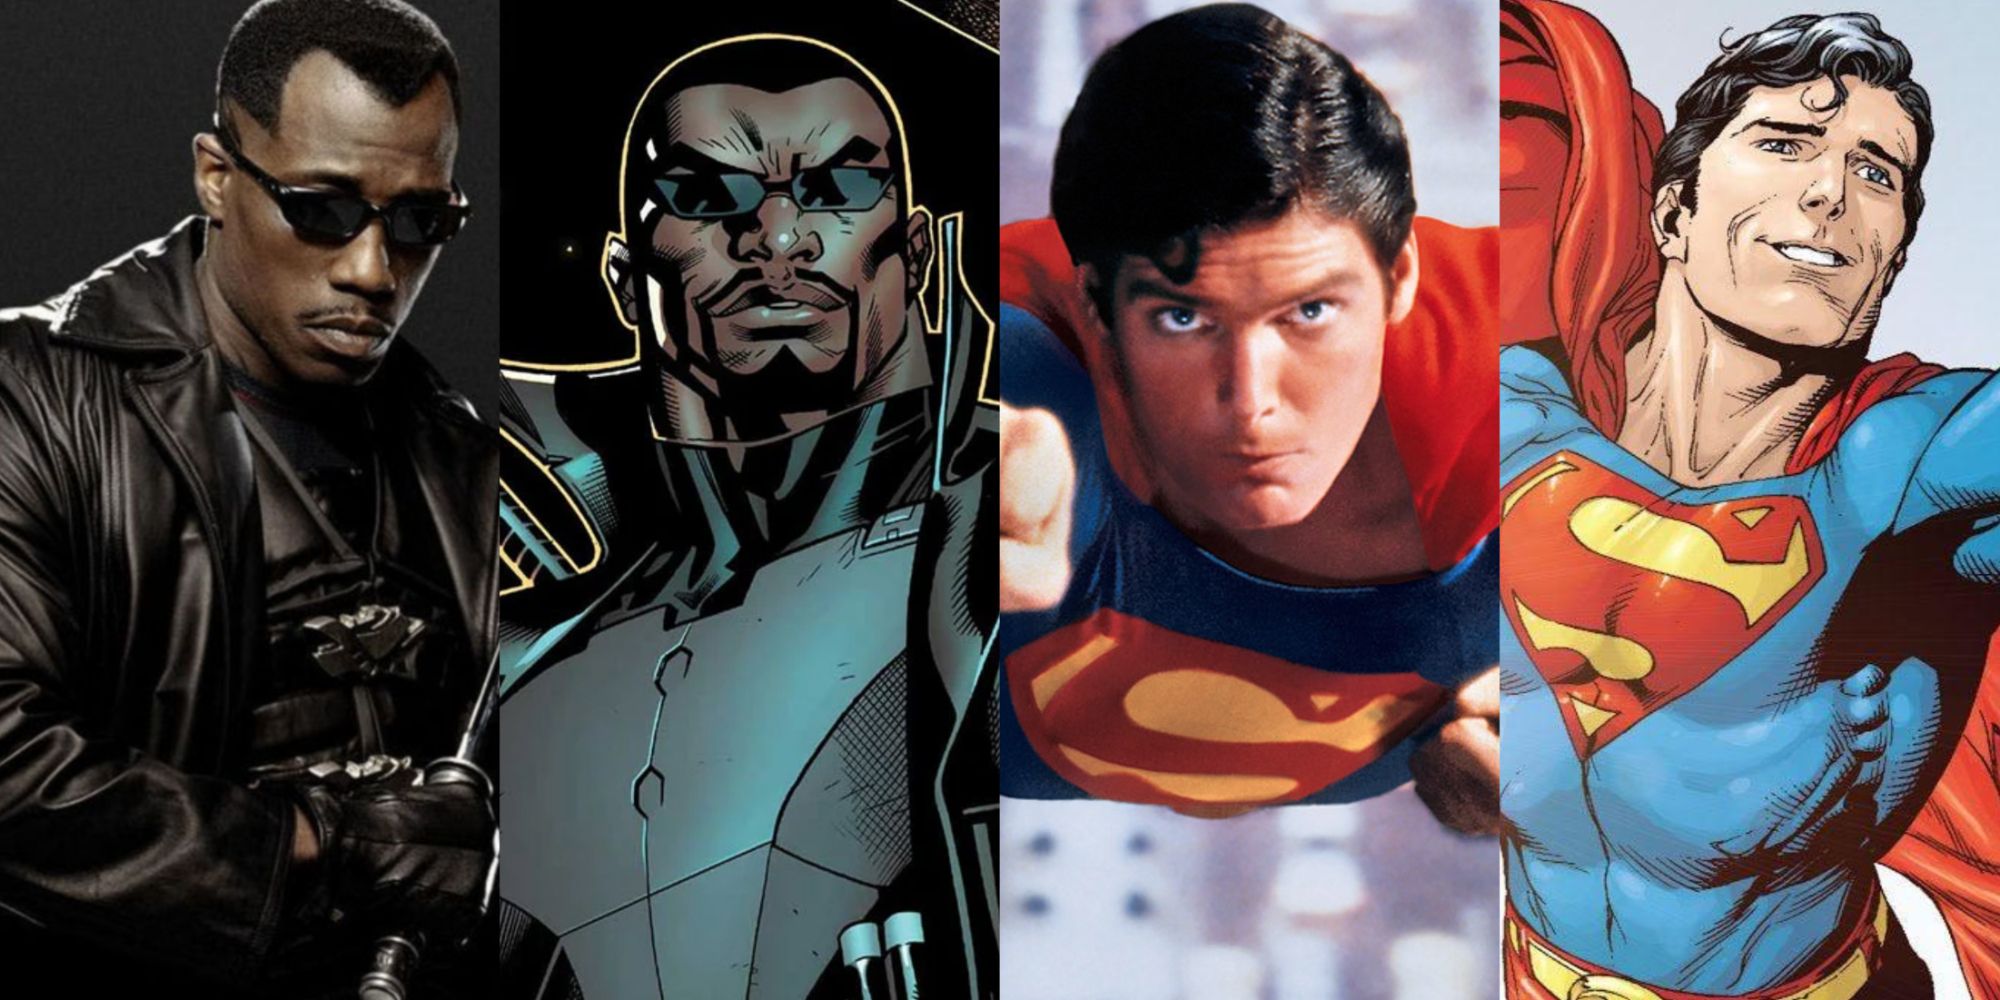 Split image of Blade and Superman in the movies and comics